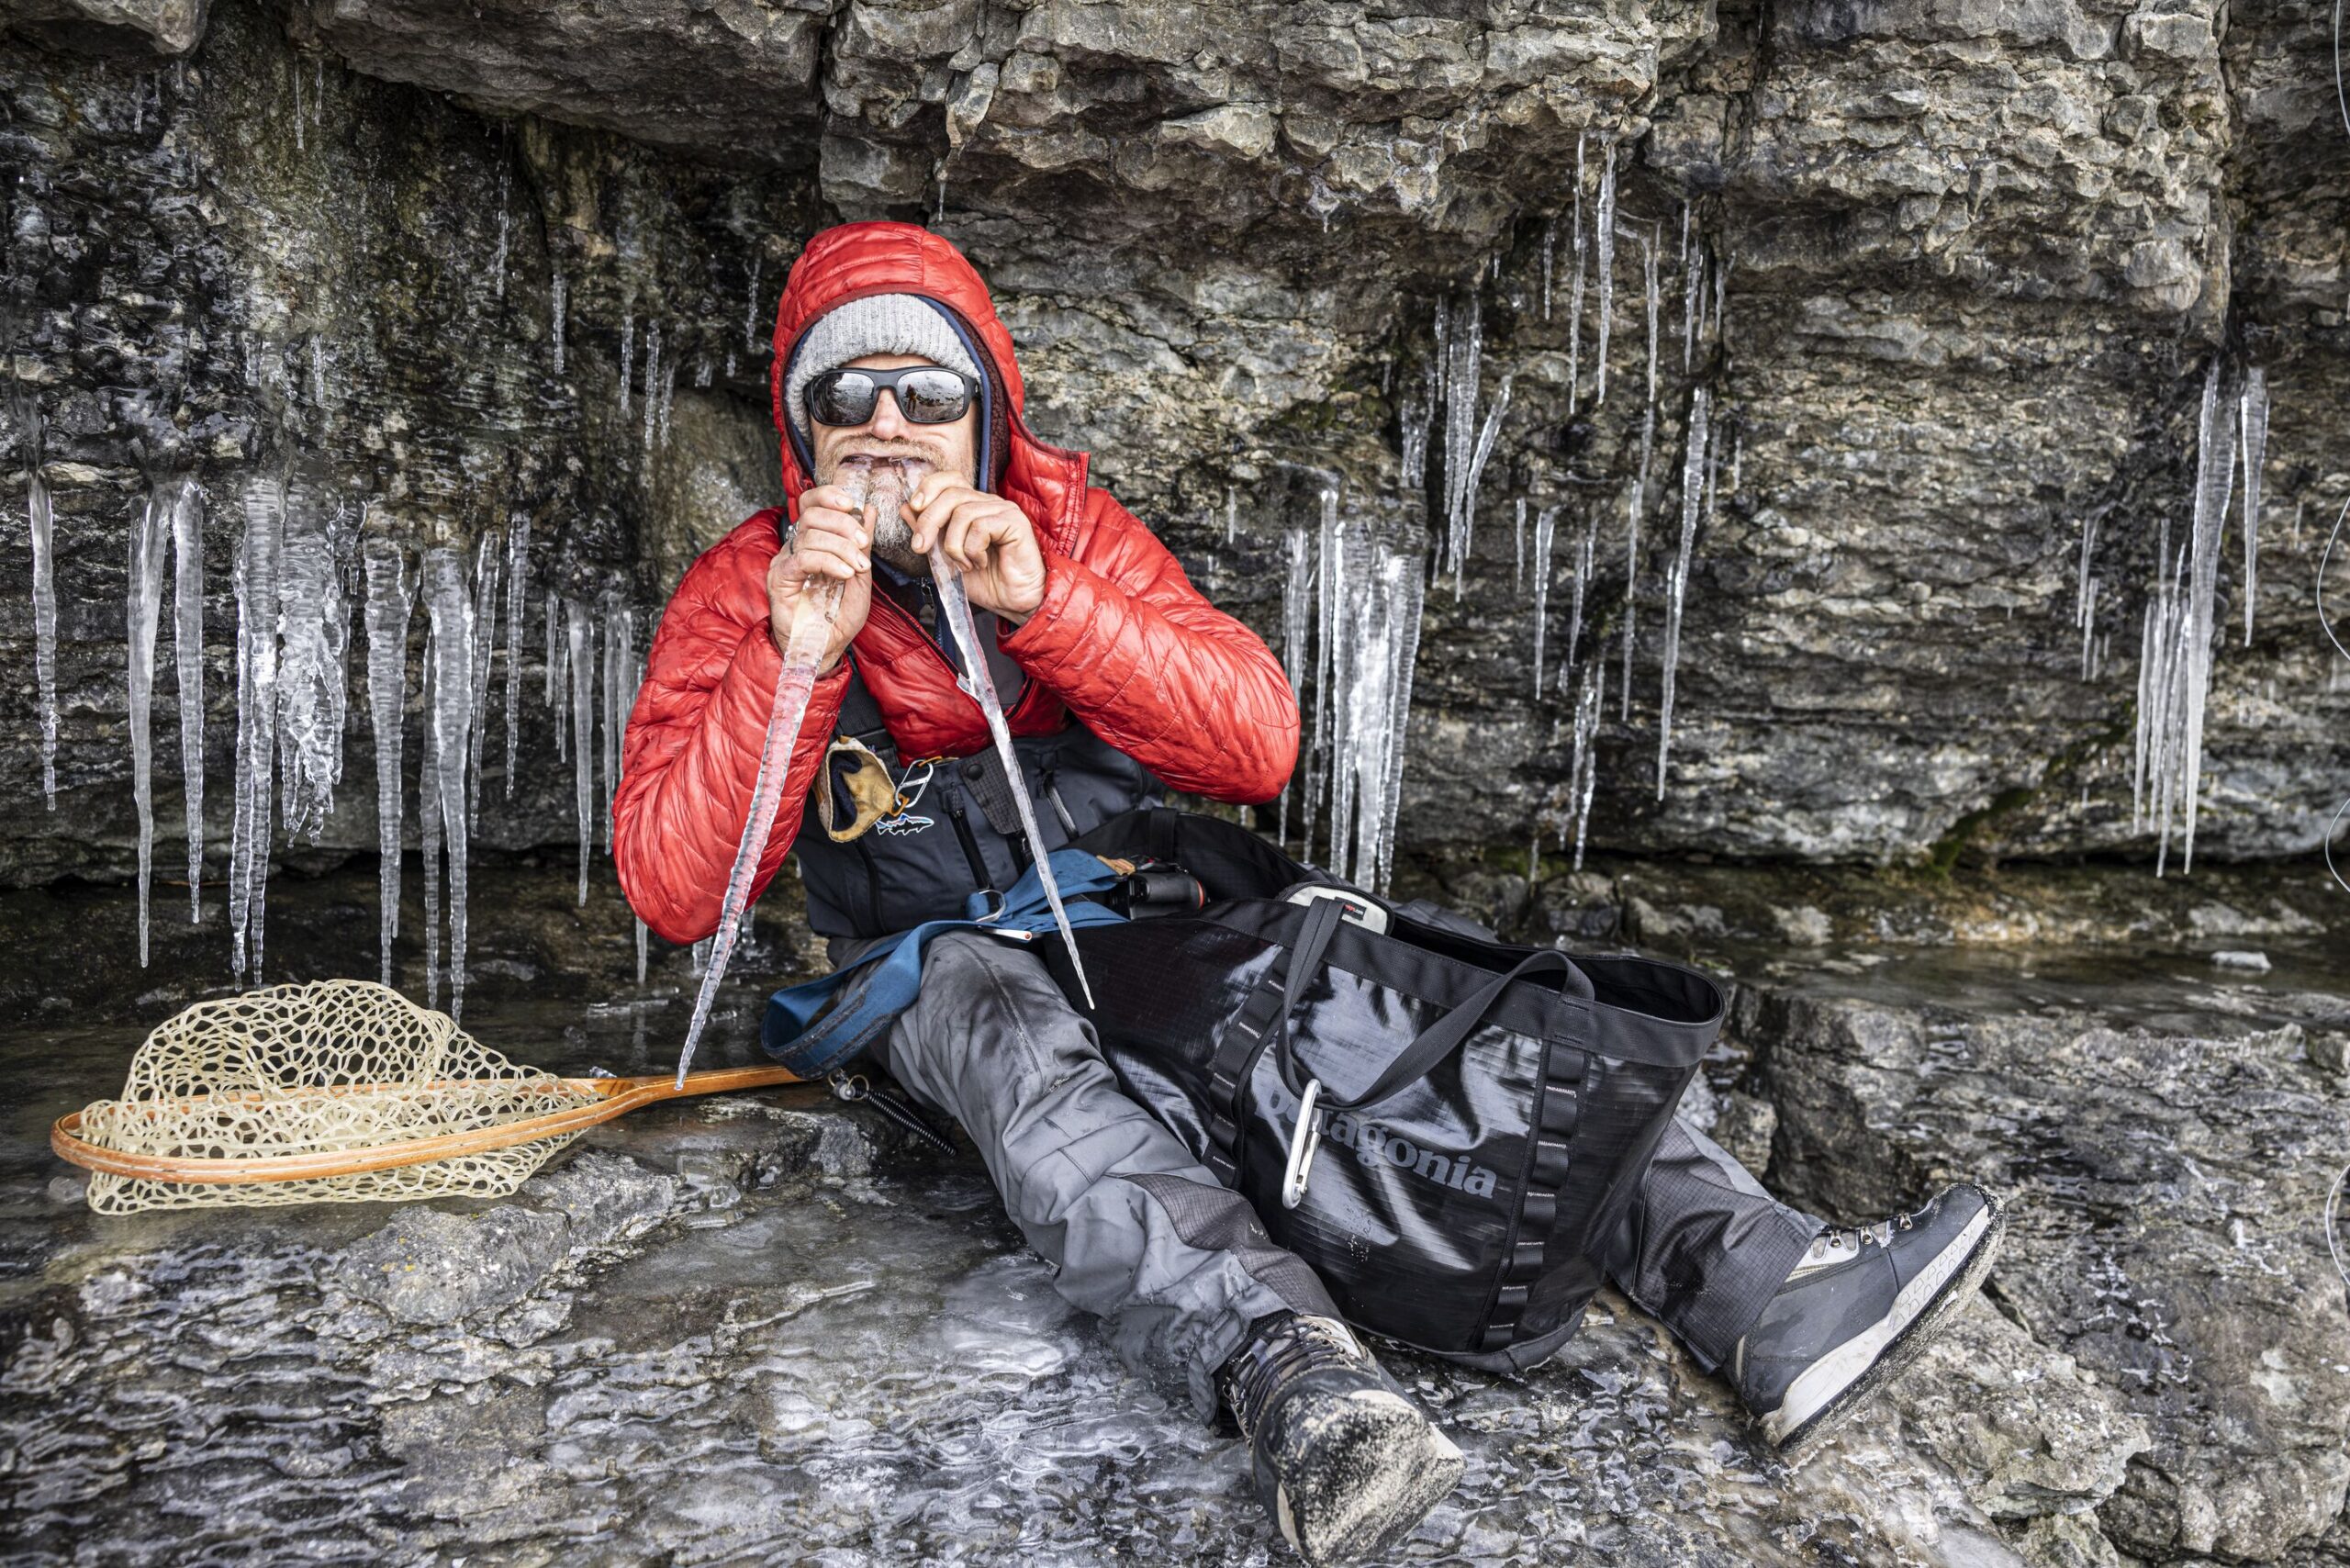 Patagonia Fall / Winter Gear Guide 2018 by Patagonia - The